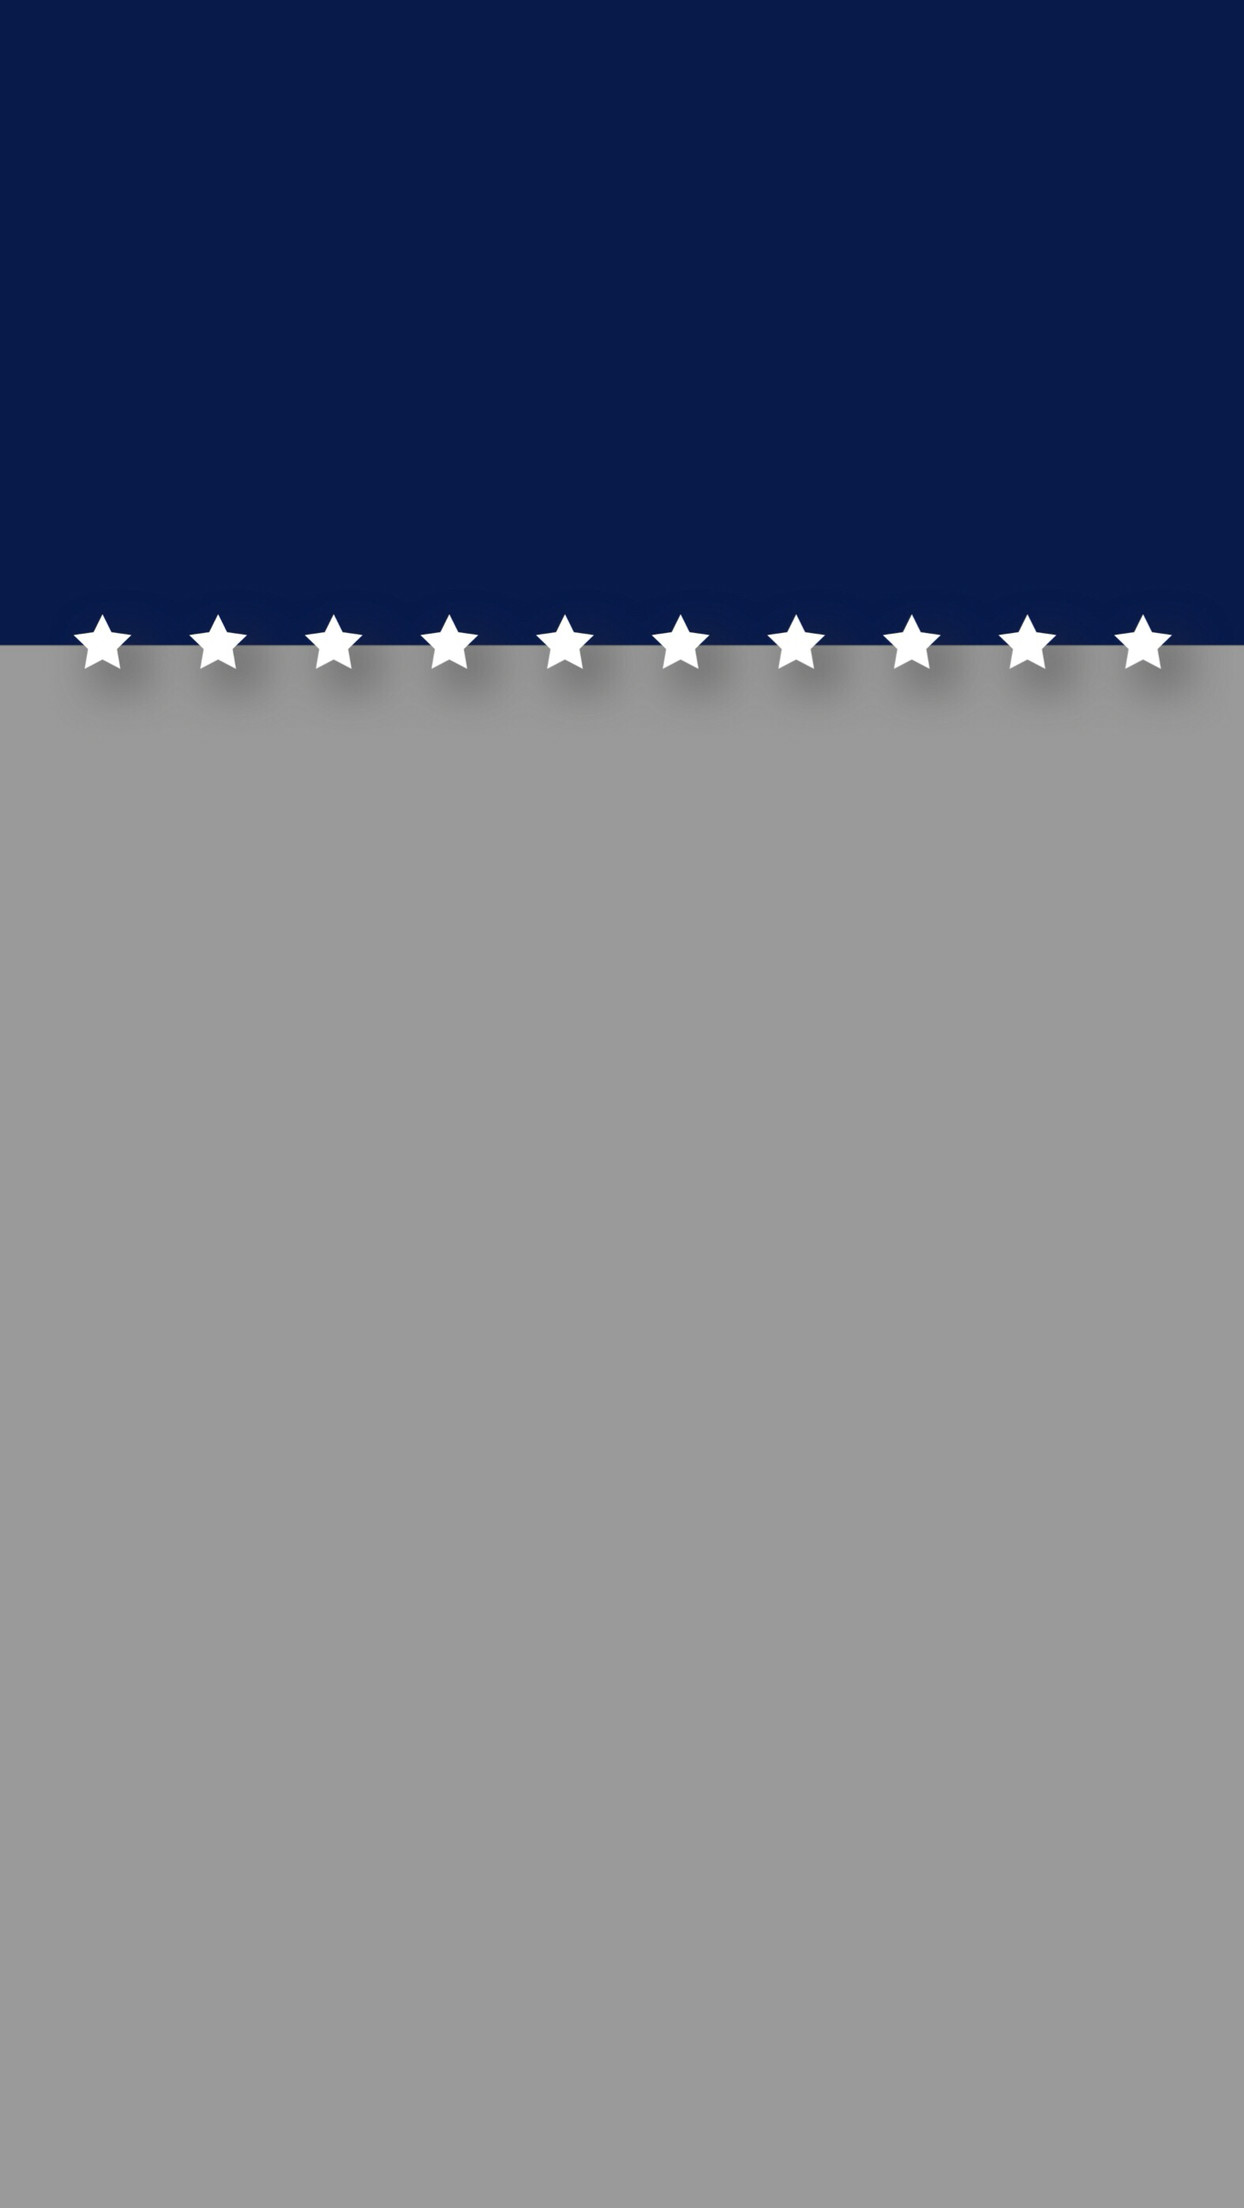 1244x2208 Minimal blue and gray with stars patriotic iPhone 6 Plus lock screen  wallpaper.